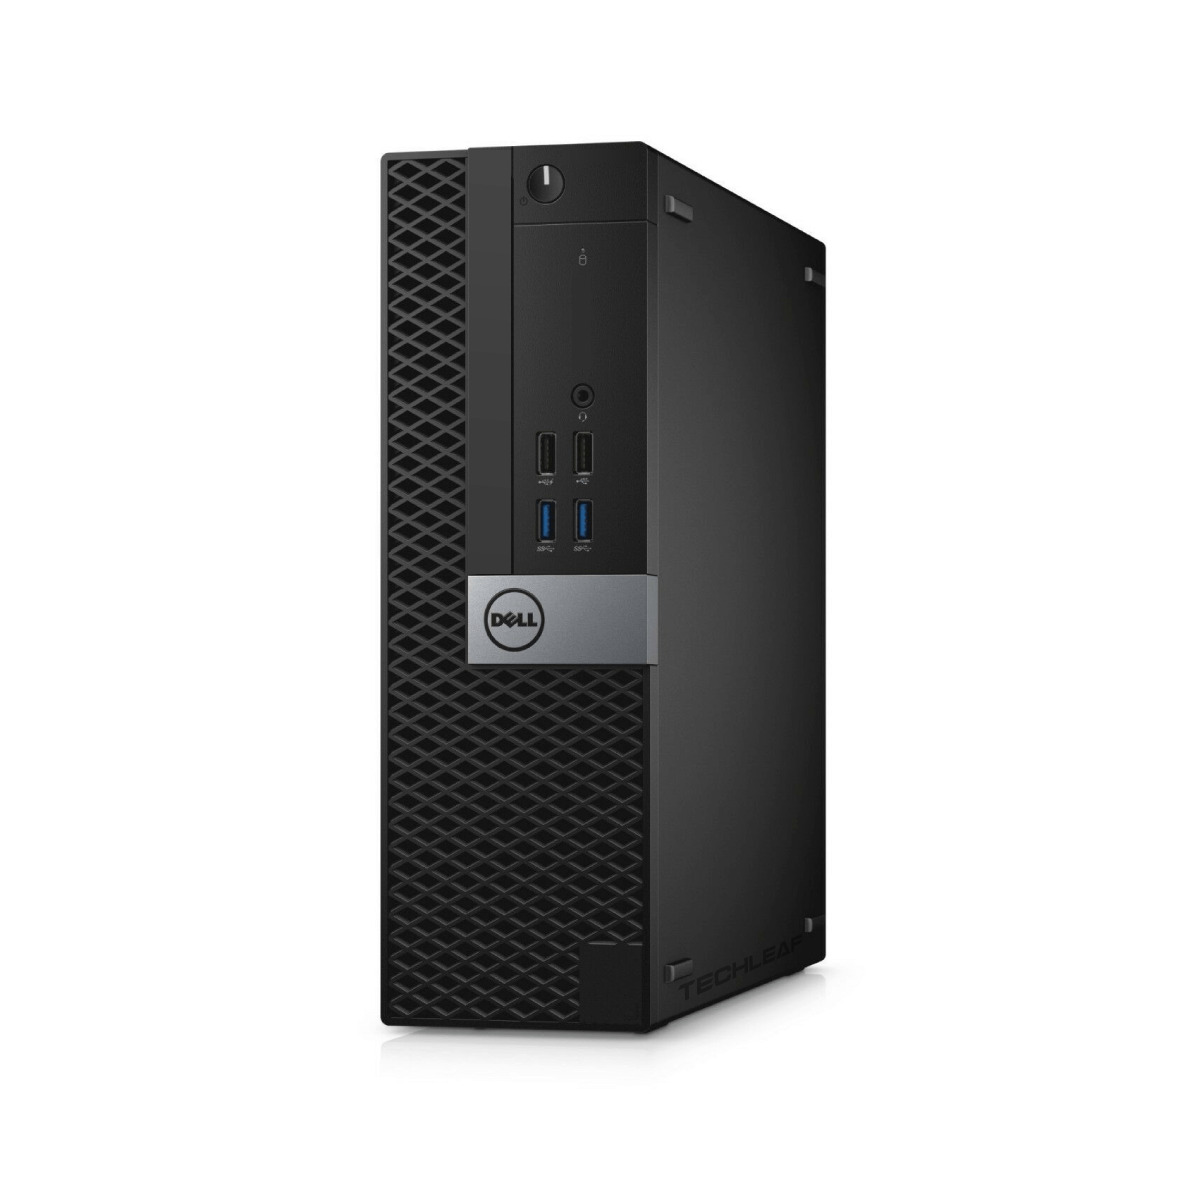 Dell Desktop Computer PC i5, up to 16GB RAM, 4TB SSD, 24